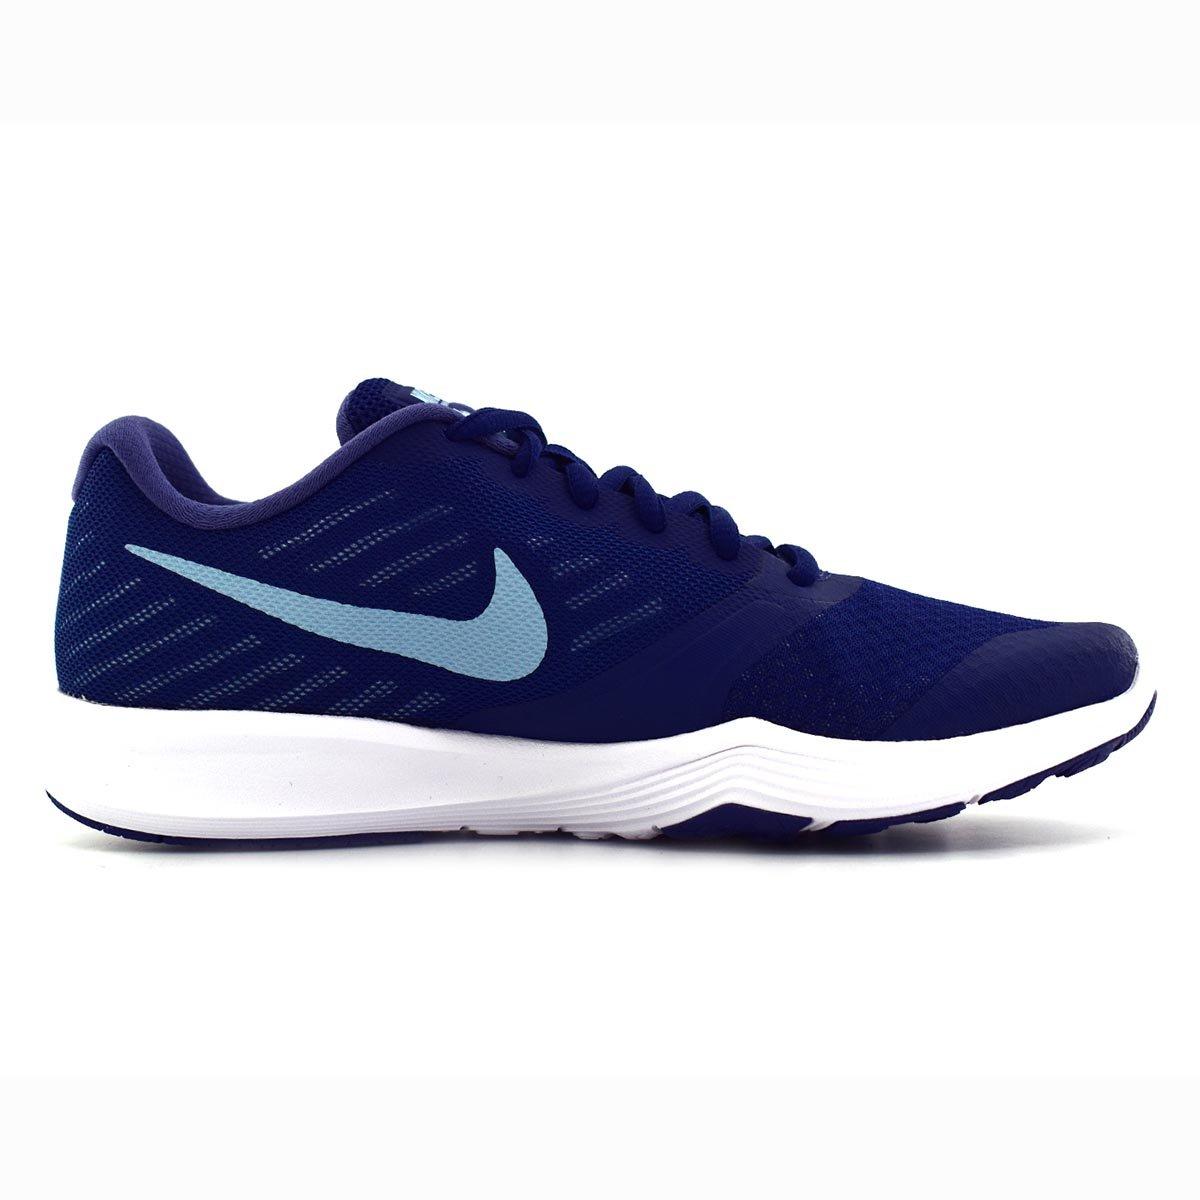 Nike City Trainer Womens Running Shoes (Navy/Blue) Online